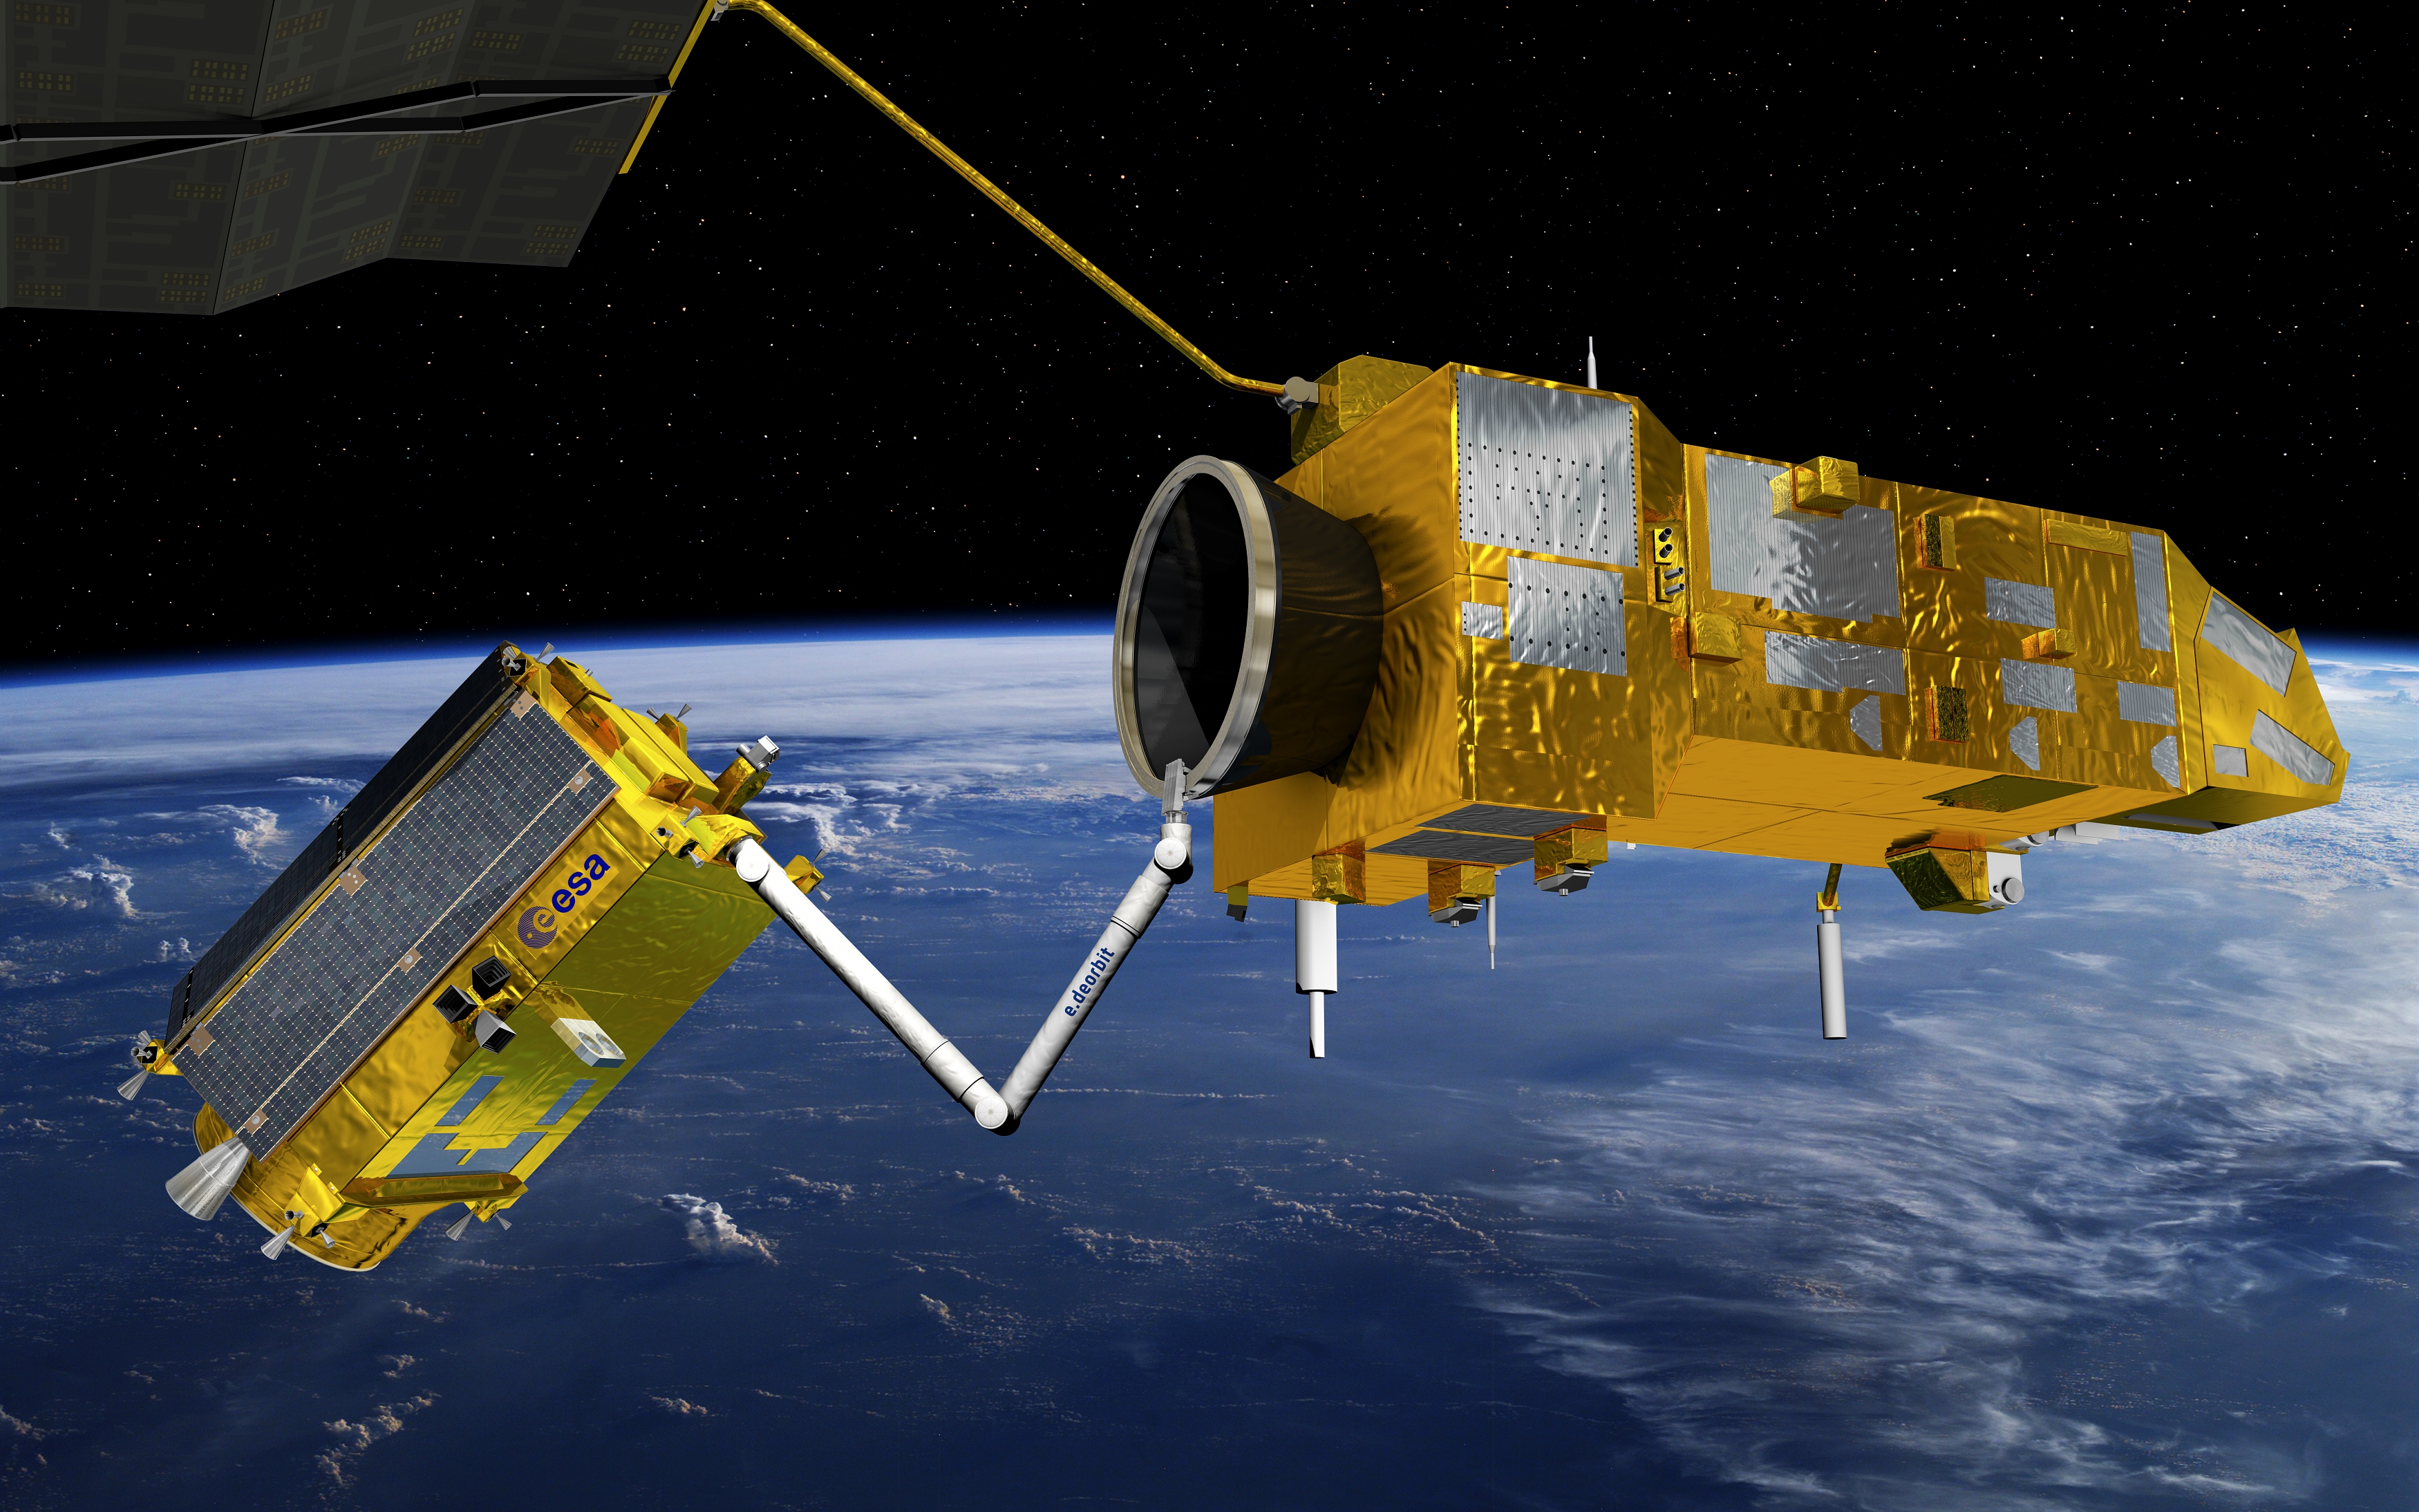 e.Deorbit is an ESA mission to remove a single large ESA-owned debris from orbit